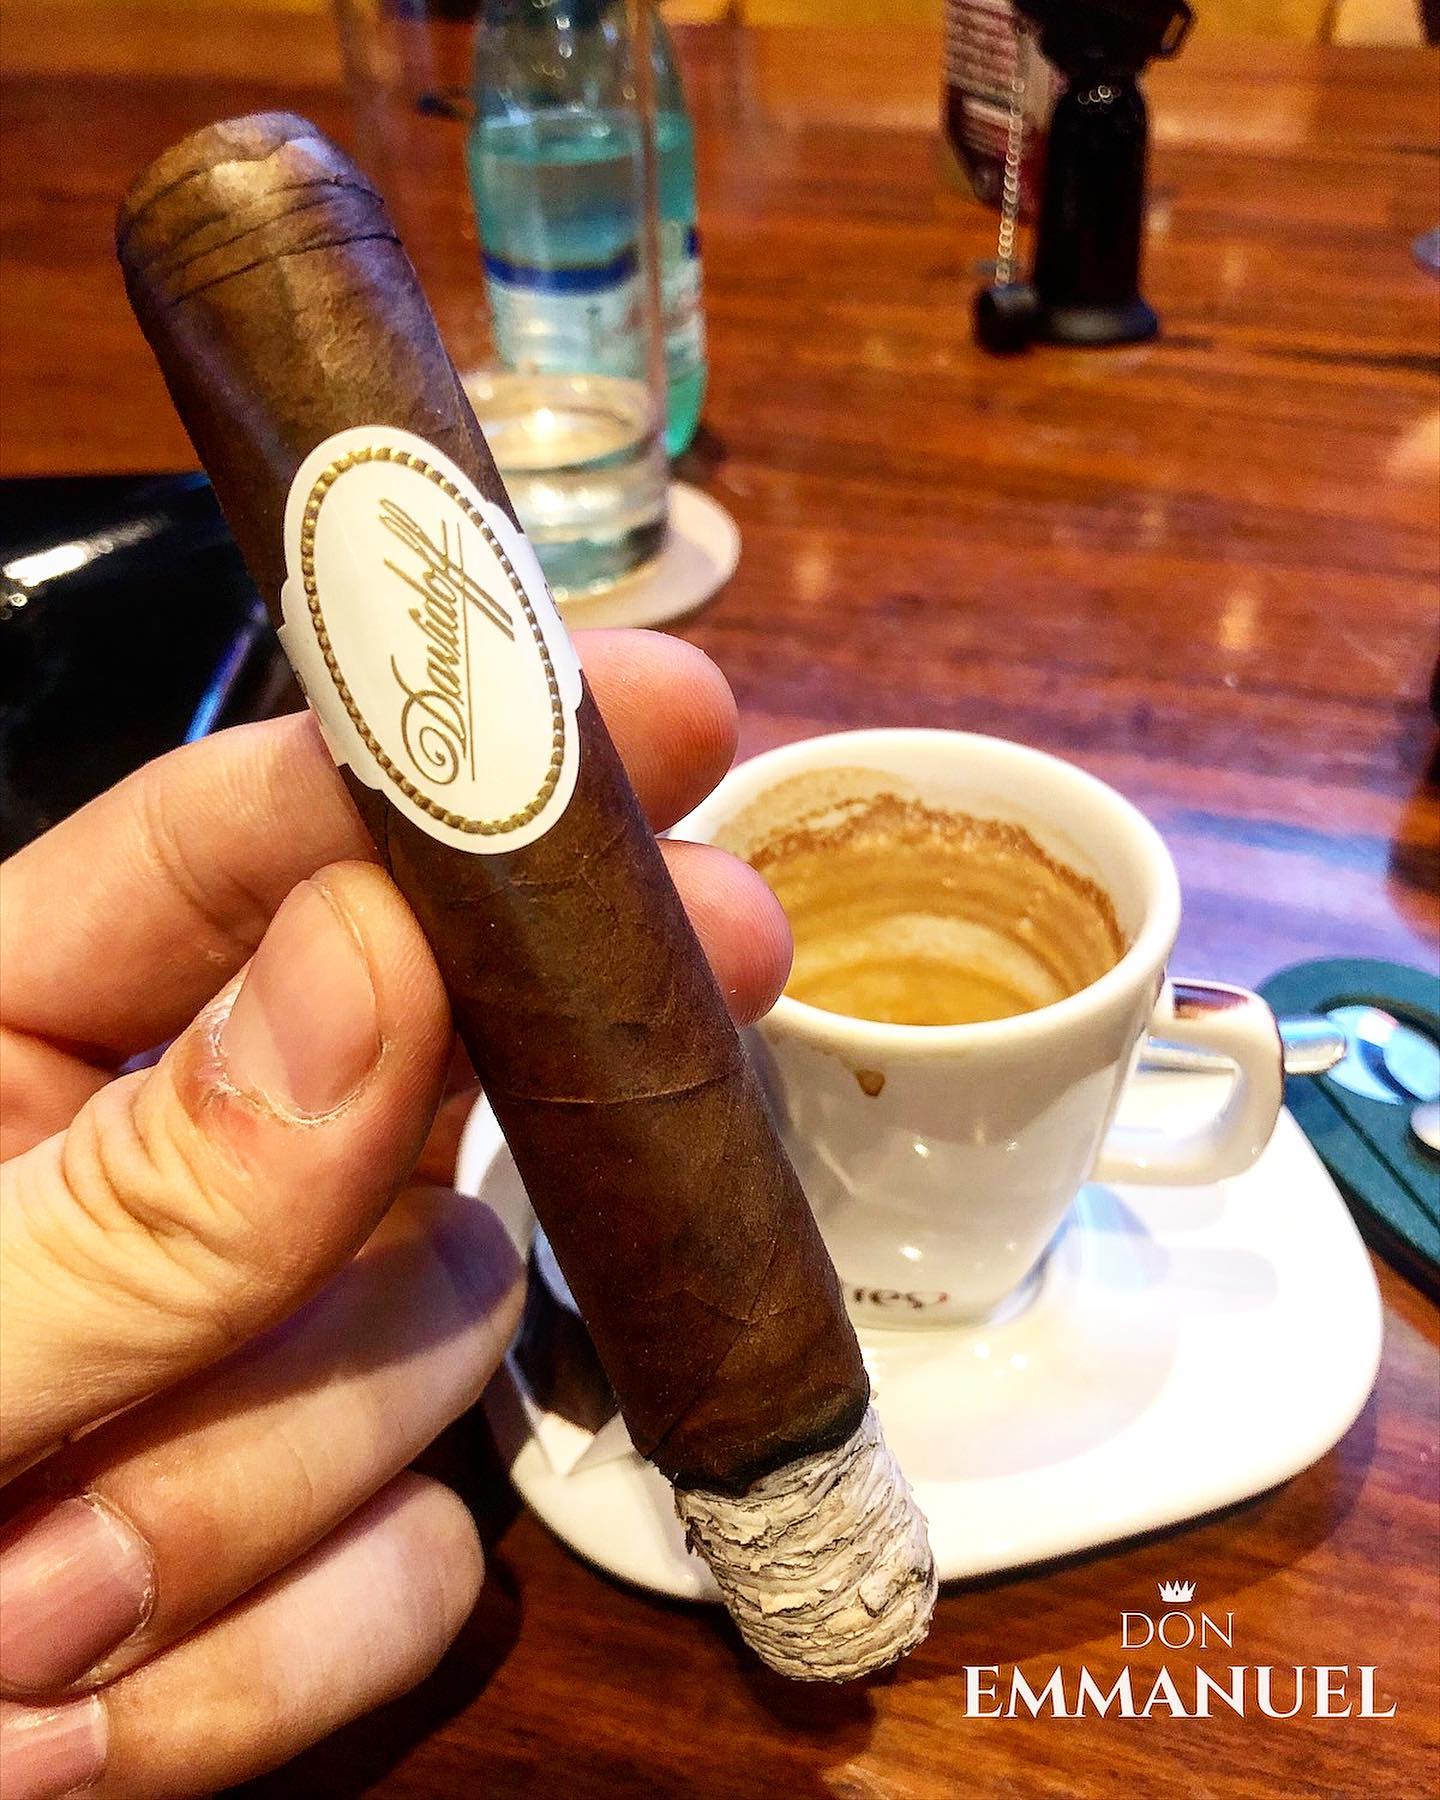 The best cigar in the world is the one you prefer to smoke on special ocasions, enabling to you relax & enjoy that which gives you maximum pleasure : Zino Davidoff